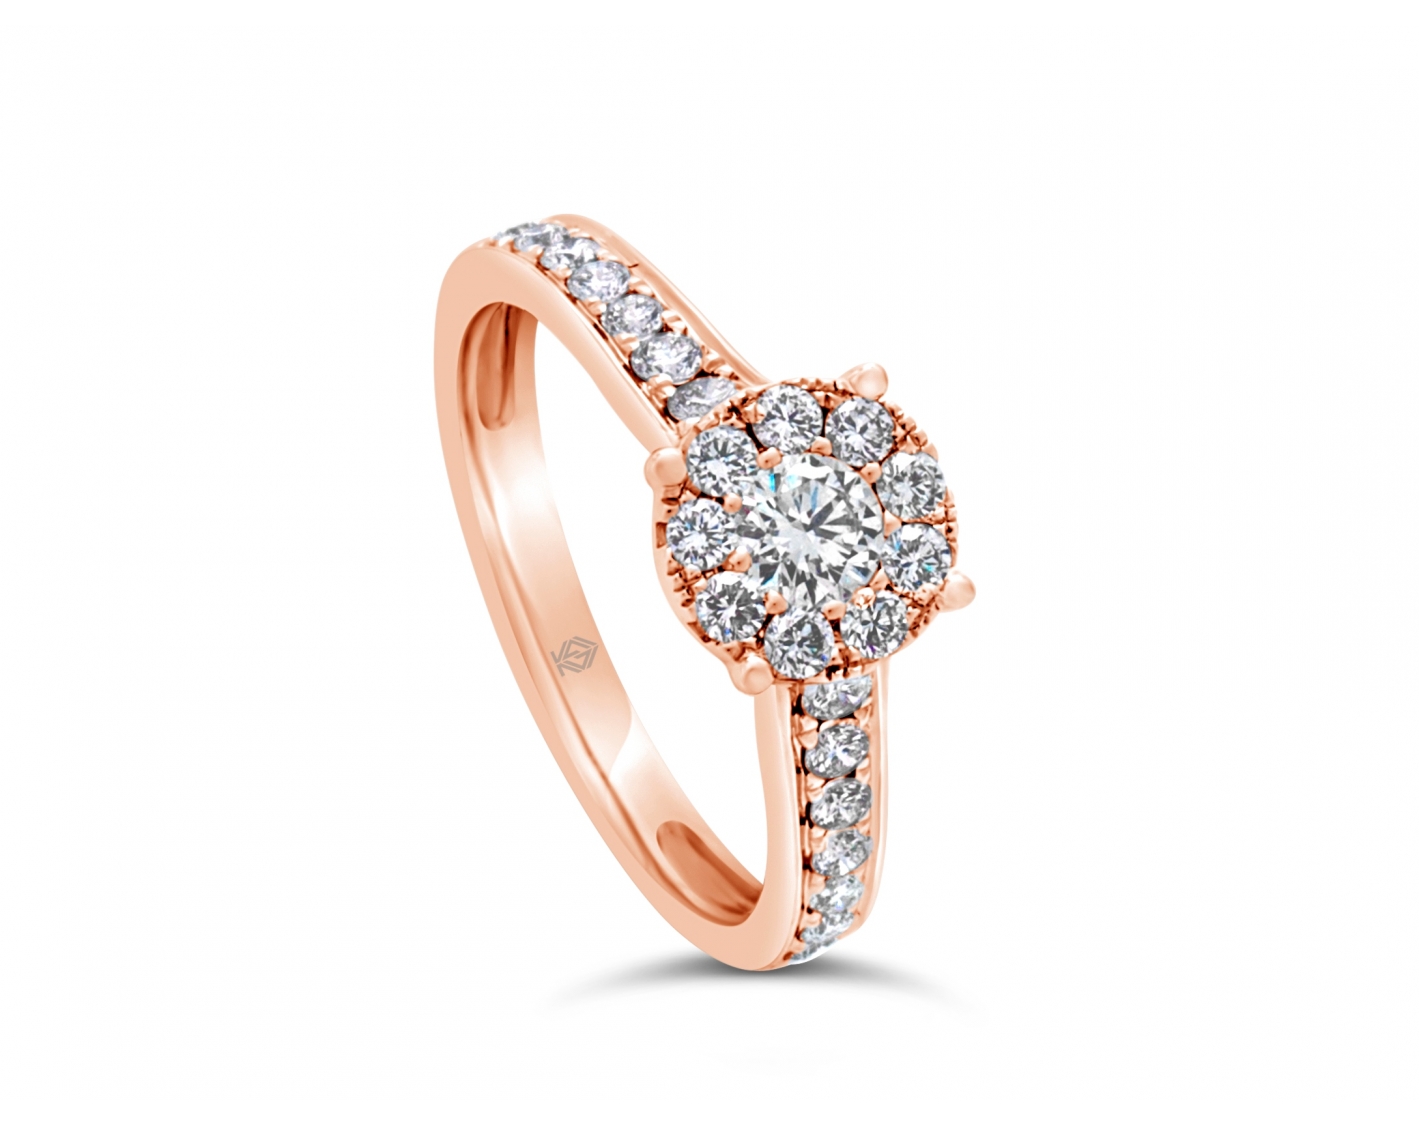 18k rose gold halo illusion set engagement ring with round channel set diamonds Photos & images